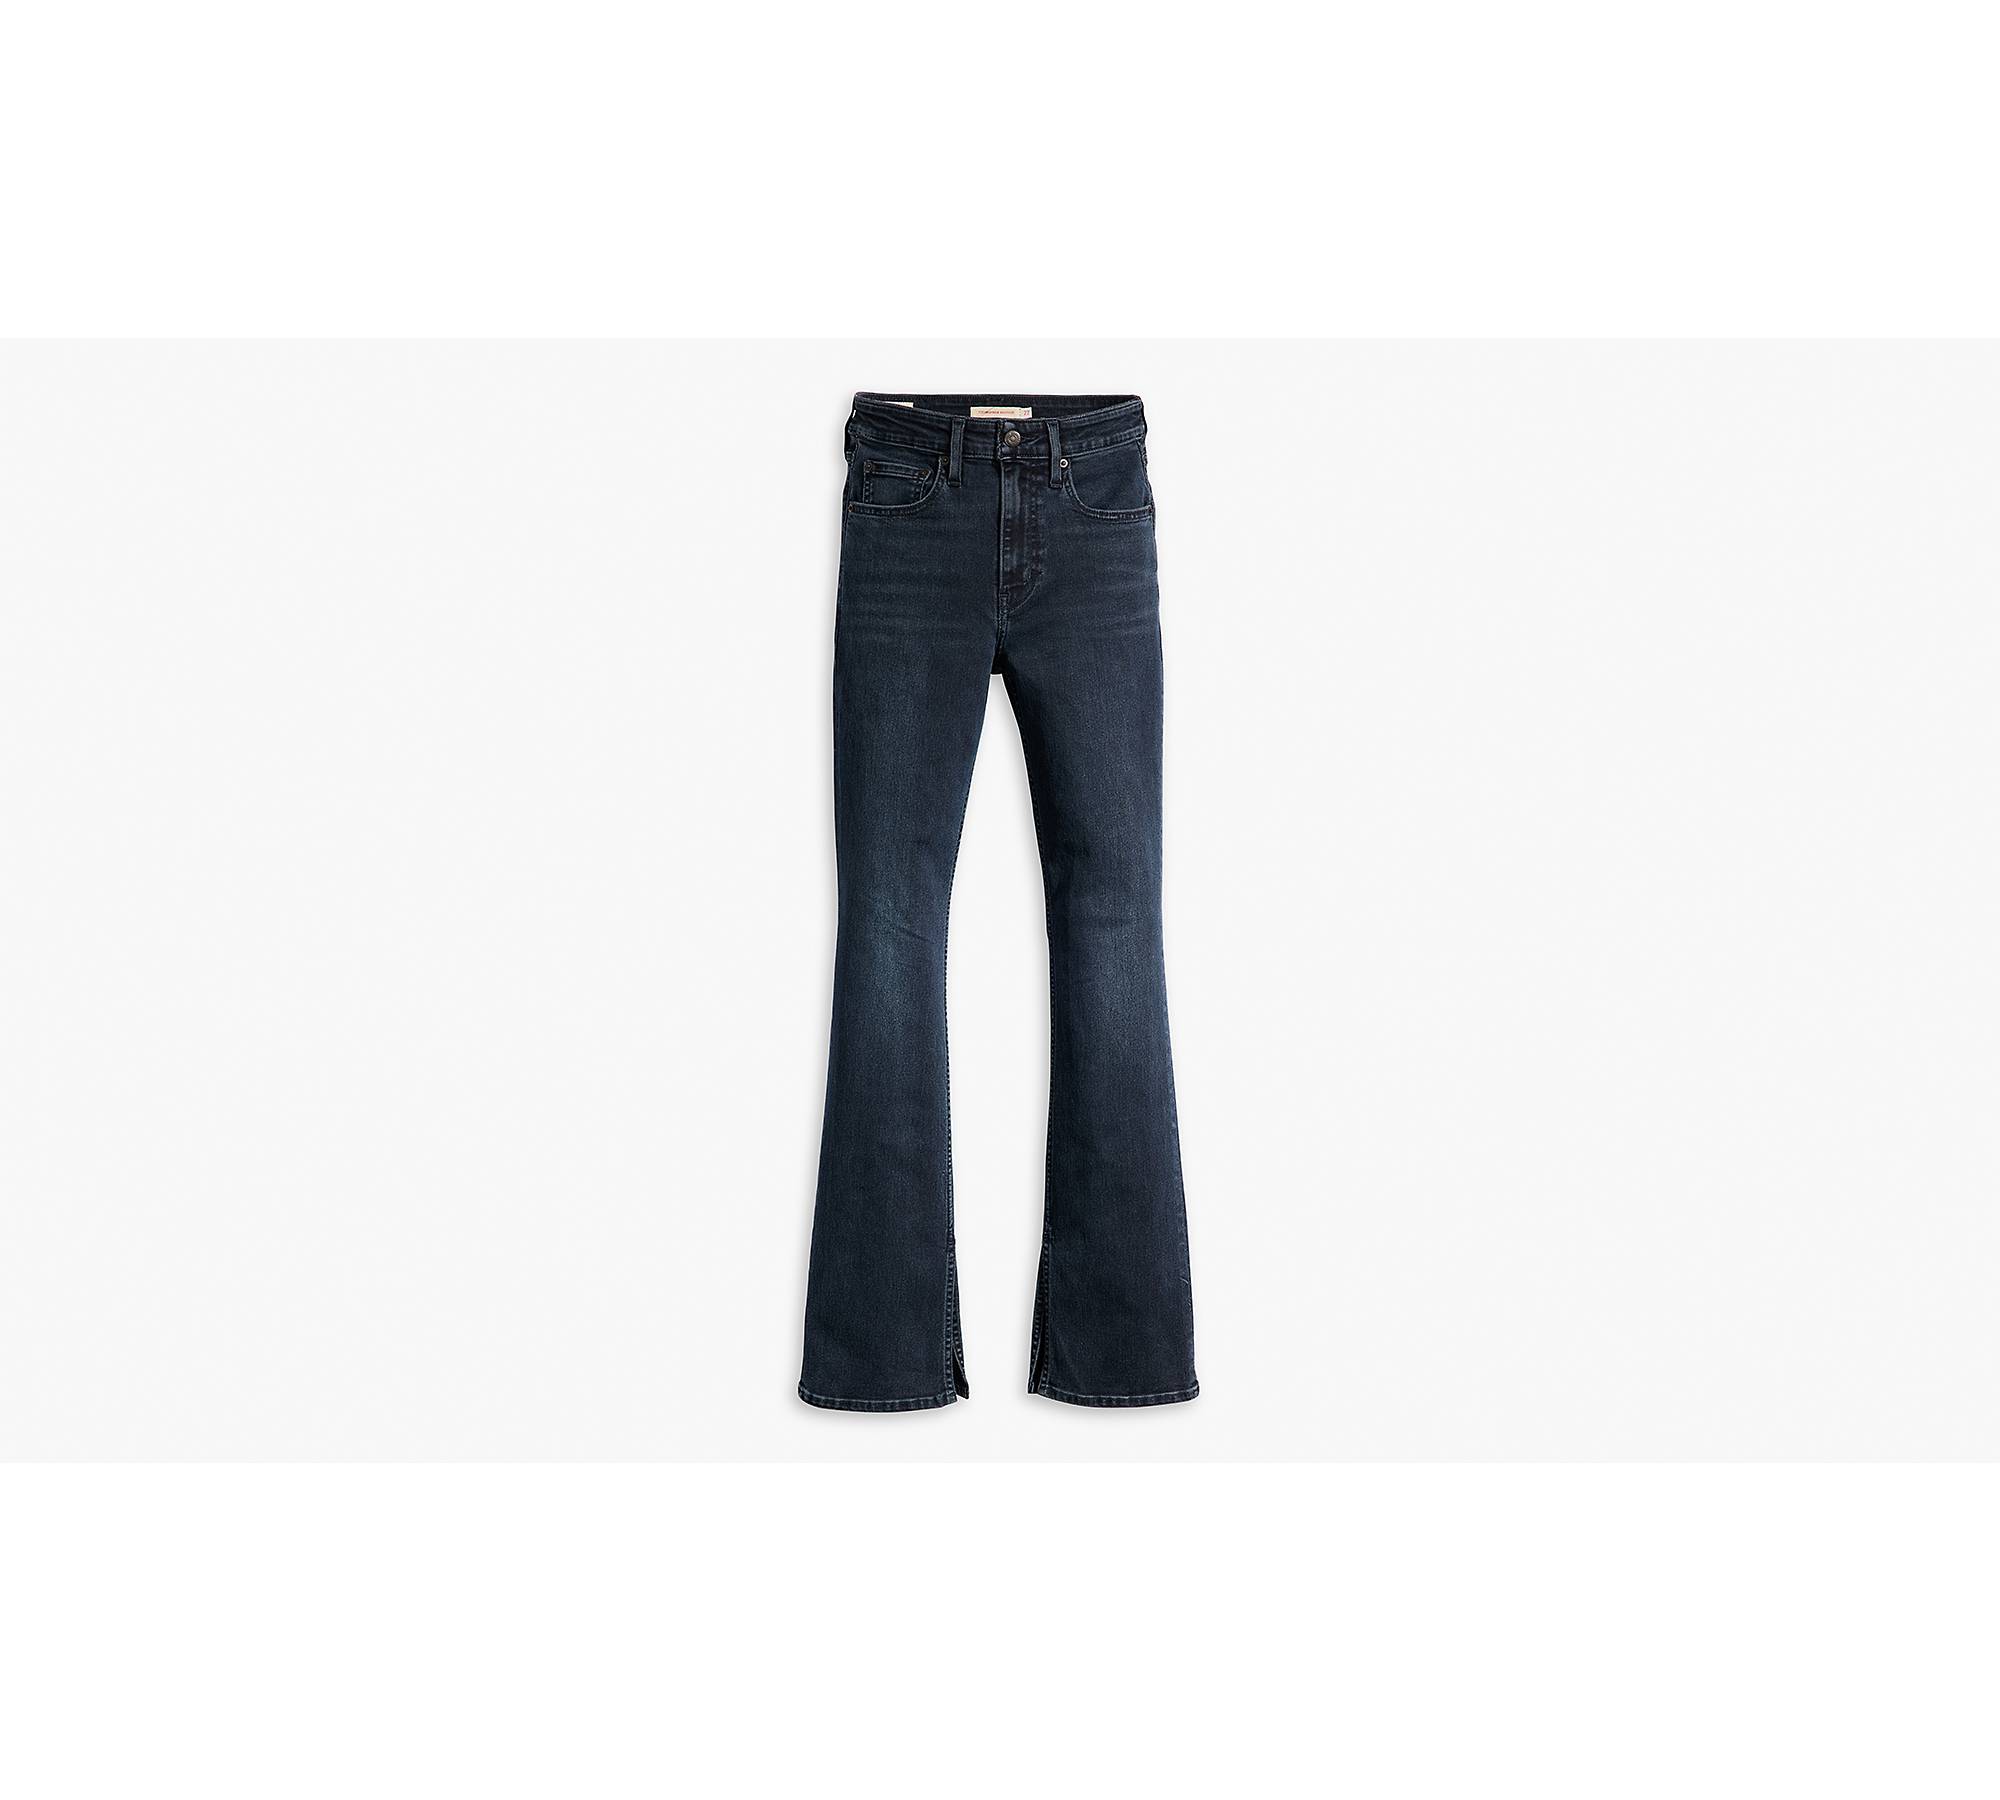 Levi's 725 High Rise Boot Cut Jeans, To The Nine at John Lewis